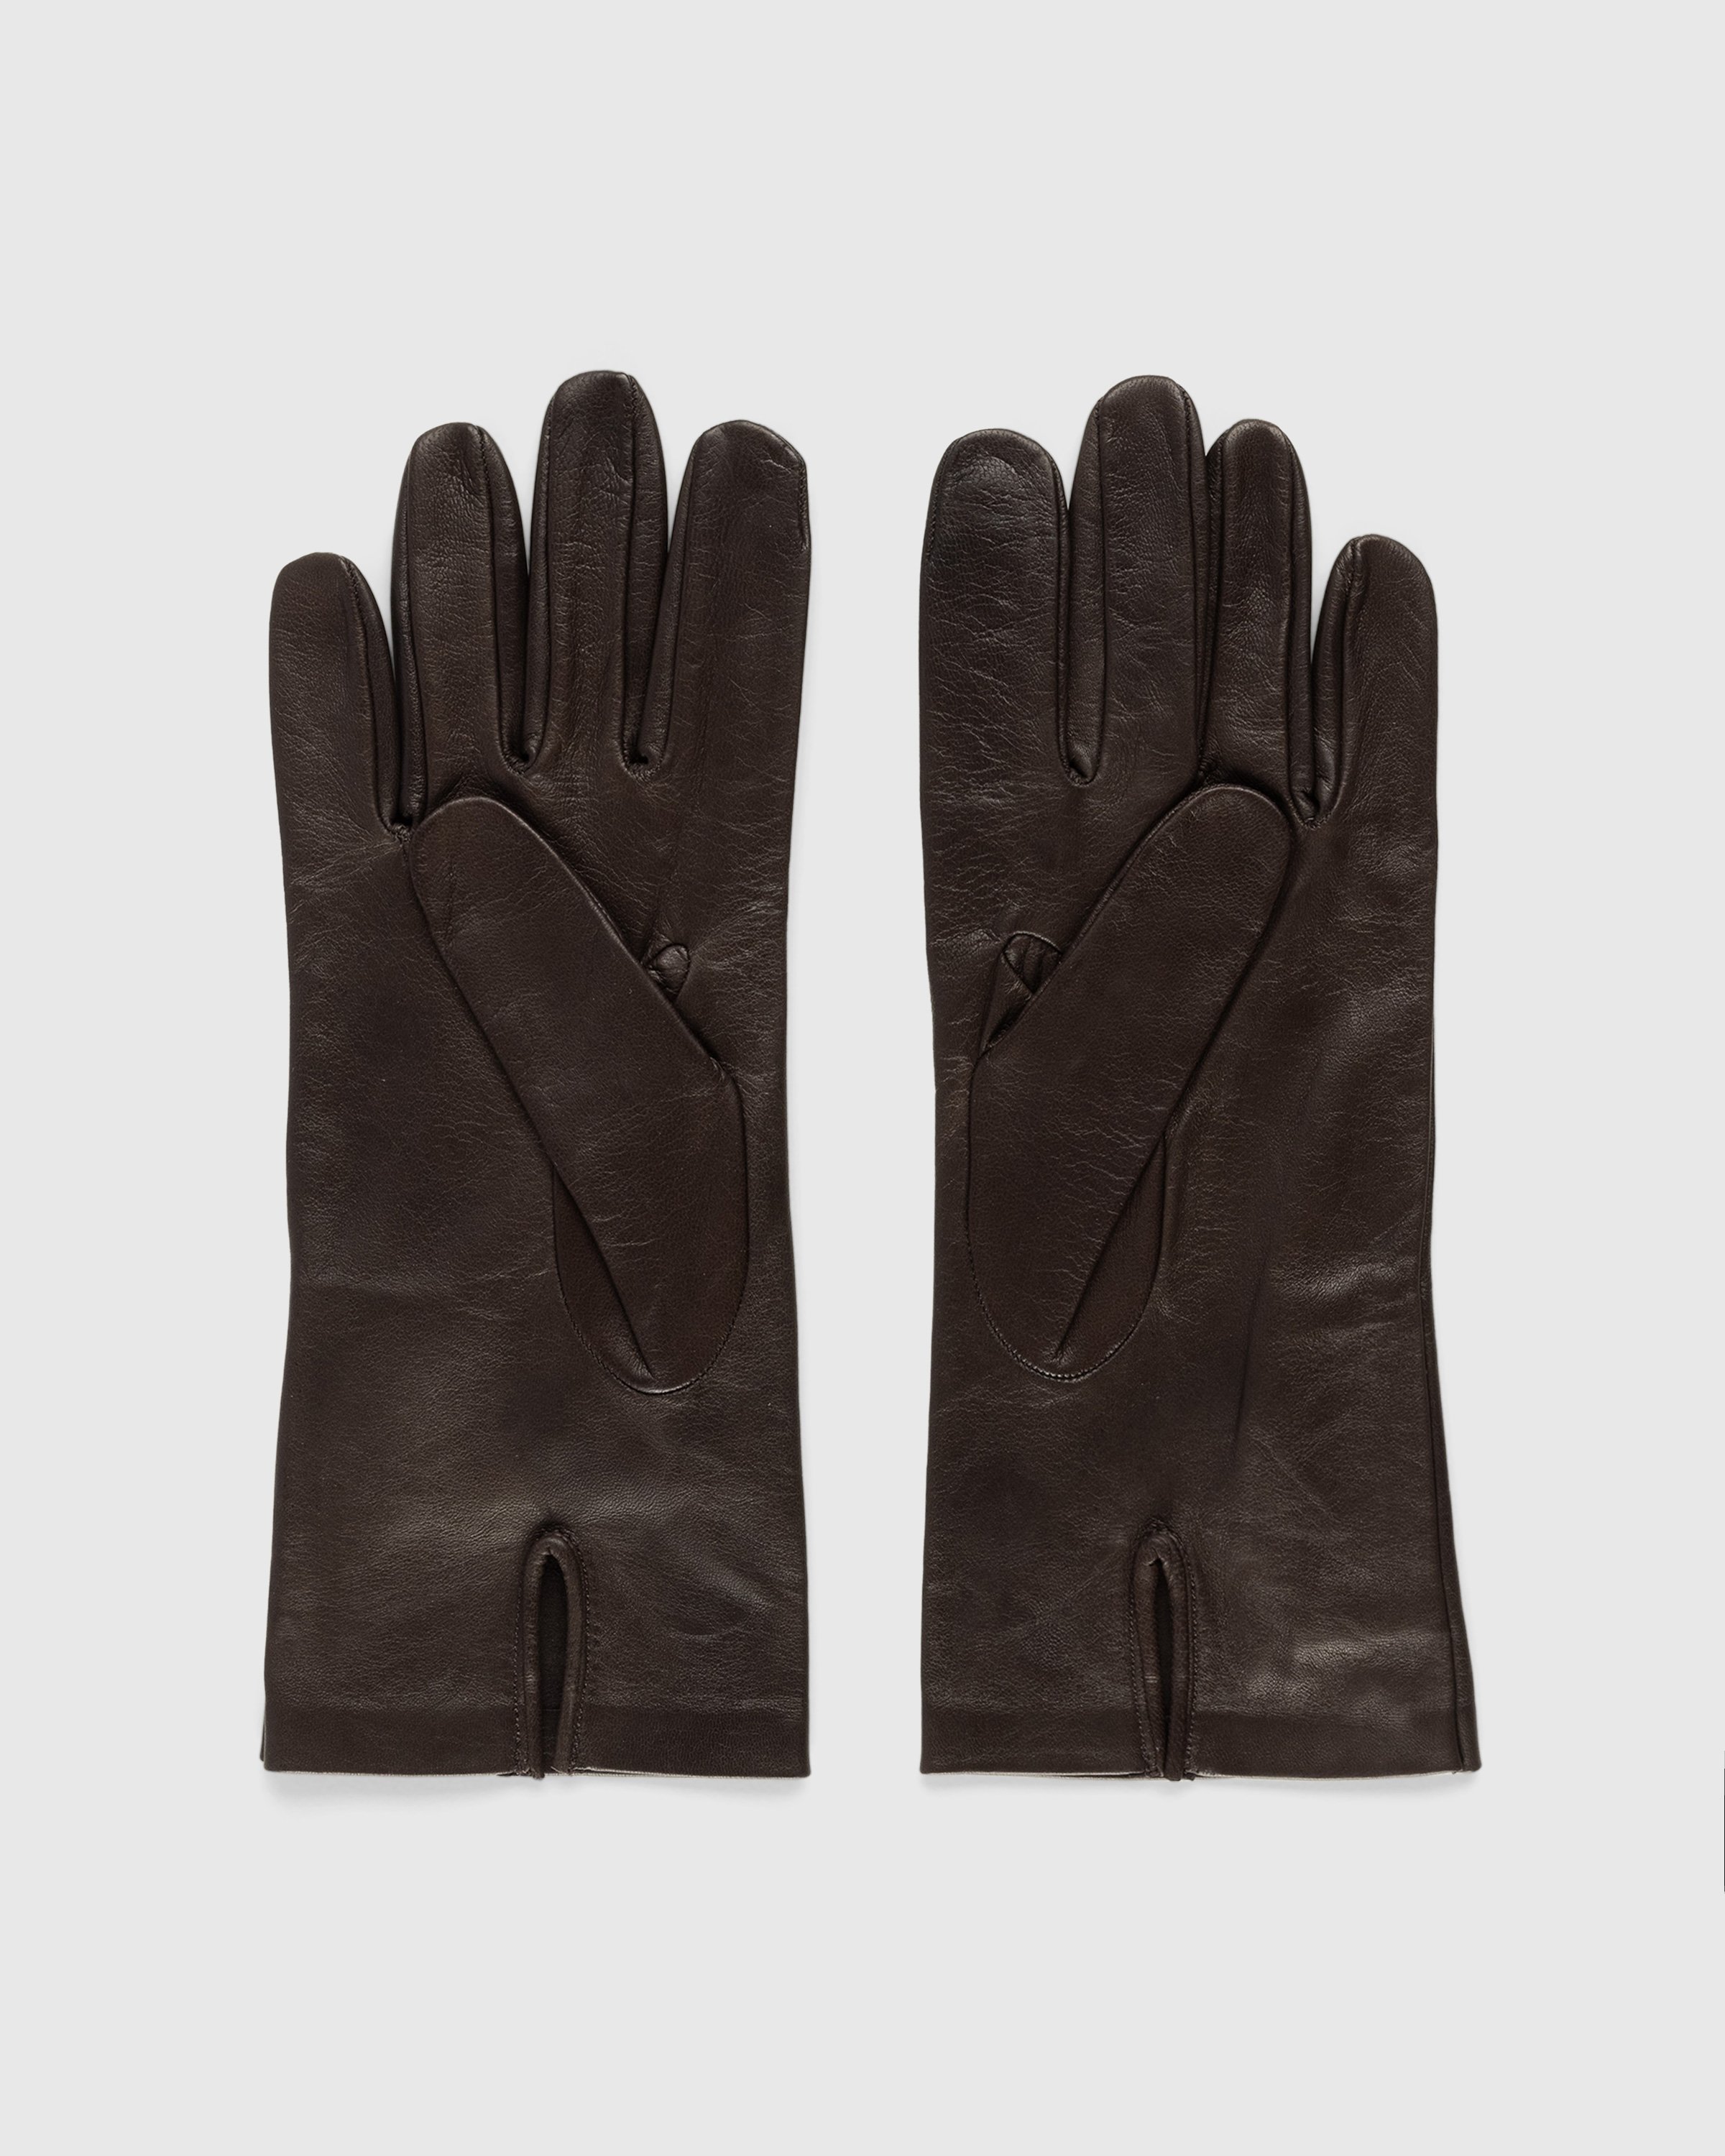 Maison Margiela - Nappa Leather Gloves Chocolate - Accessories - Brown - Image 2